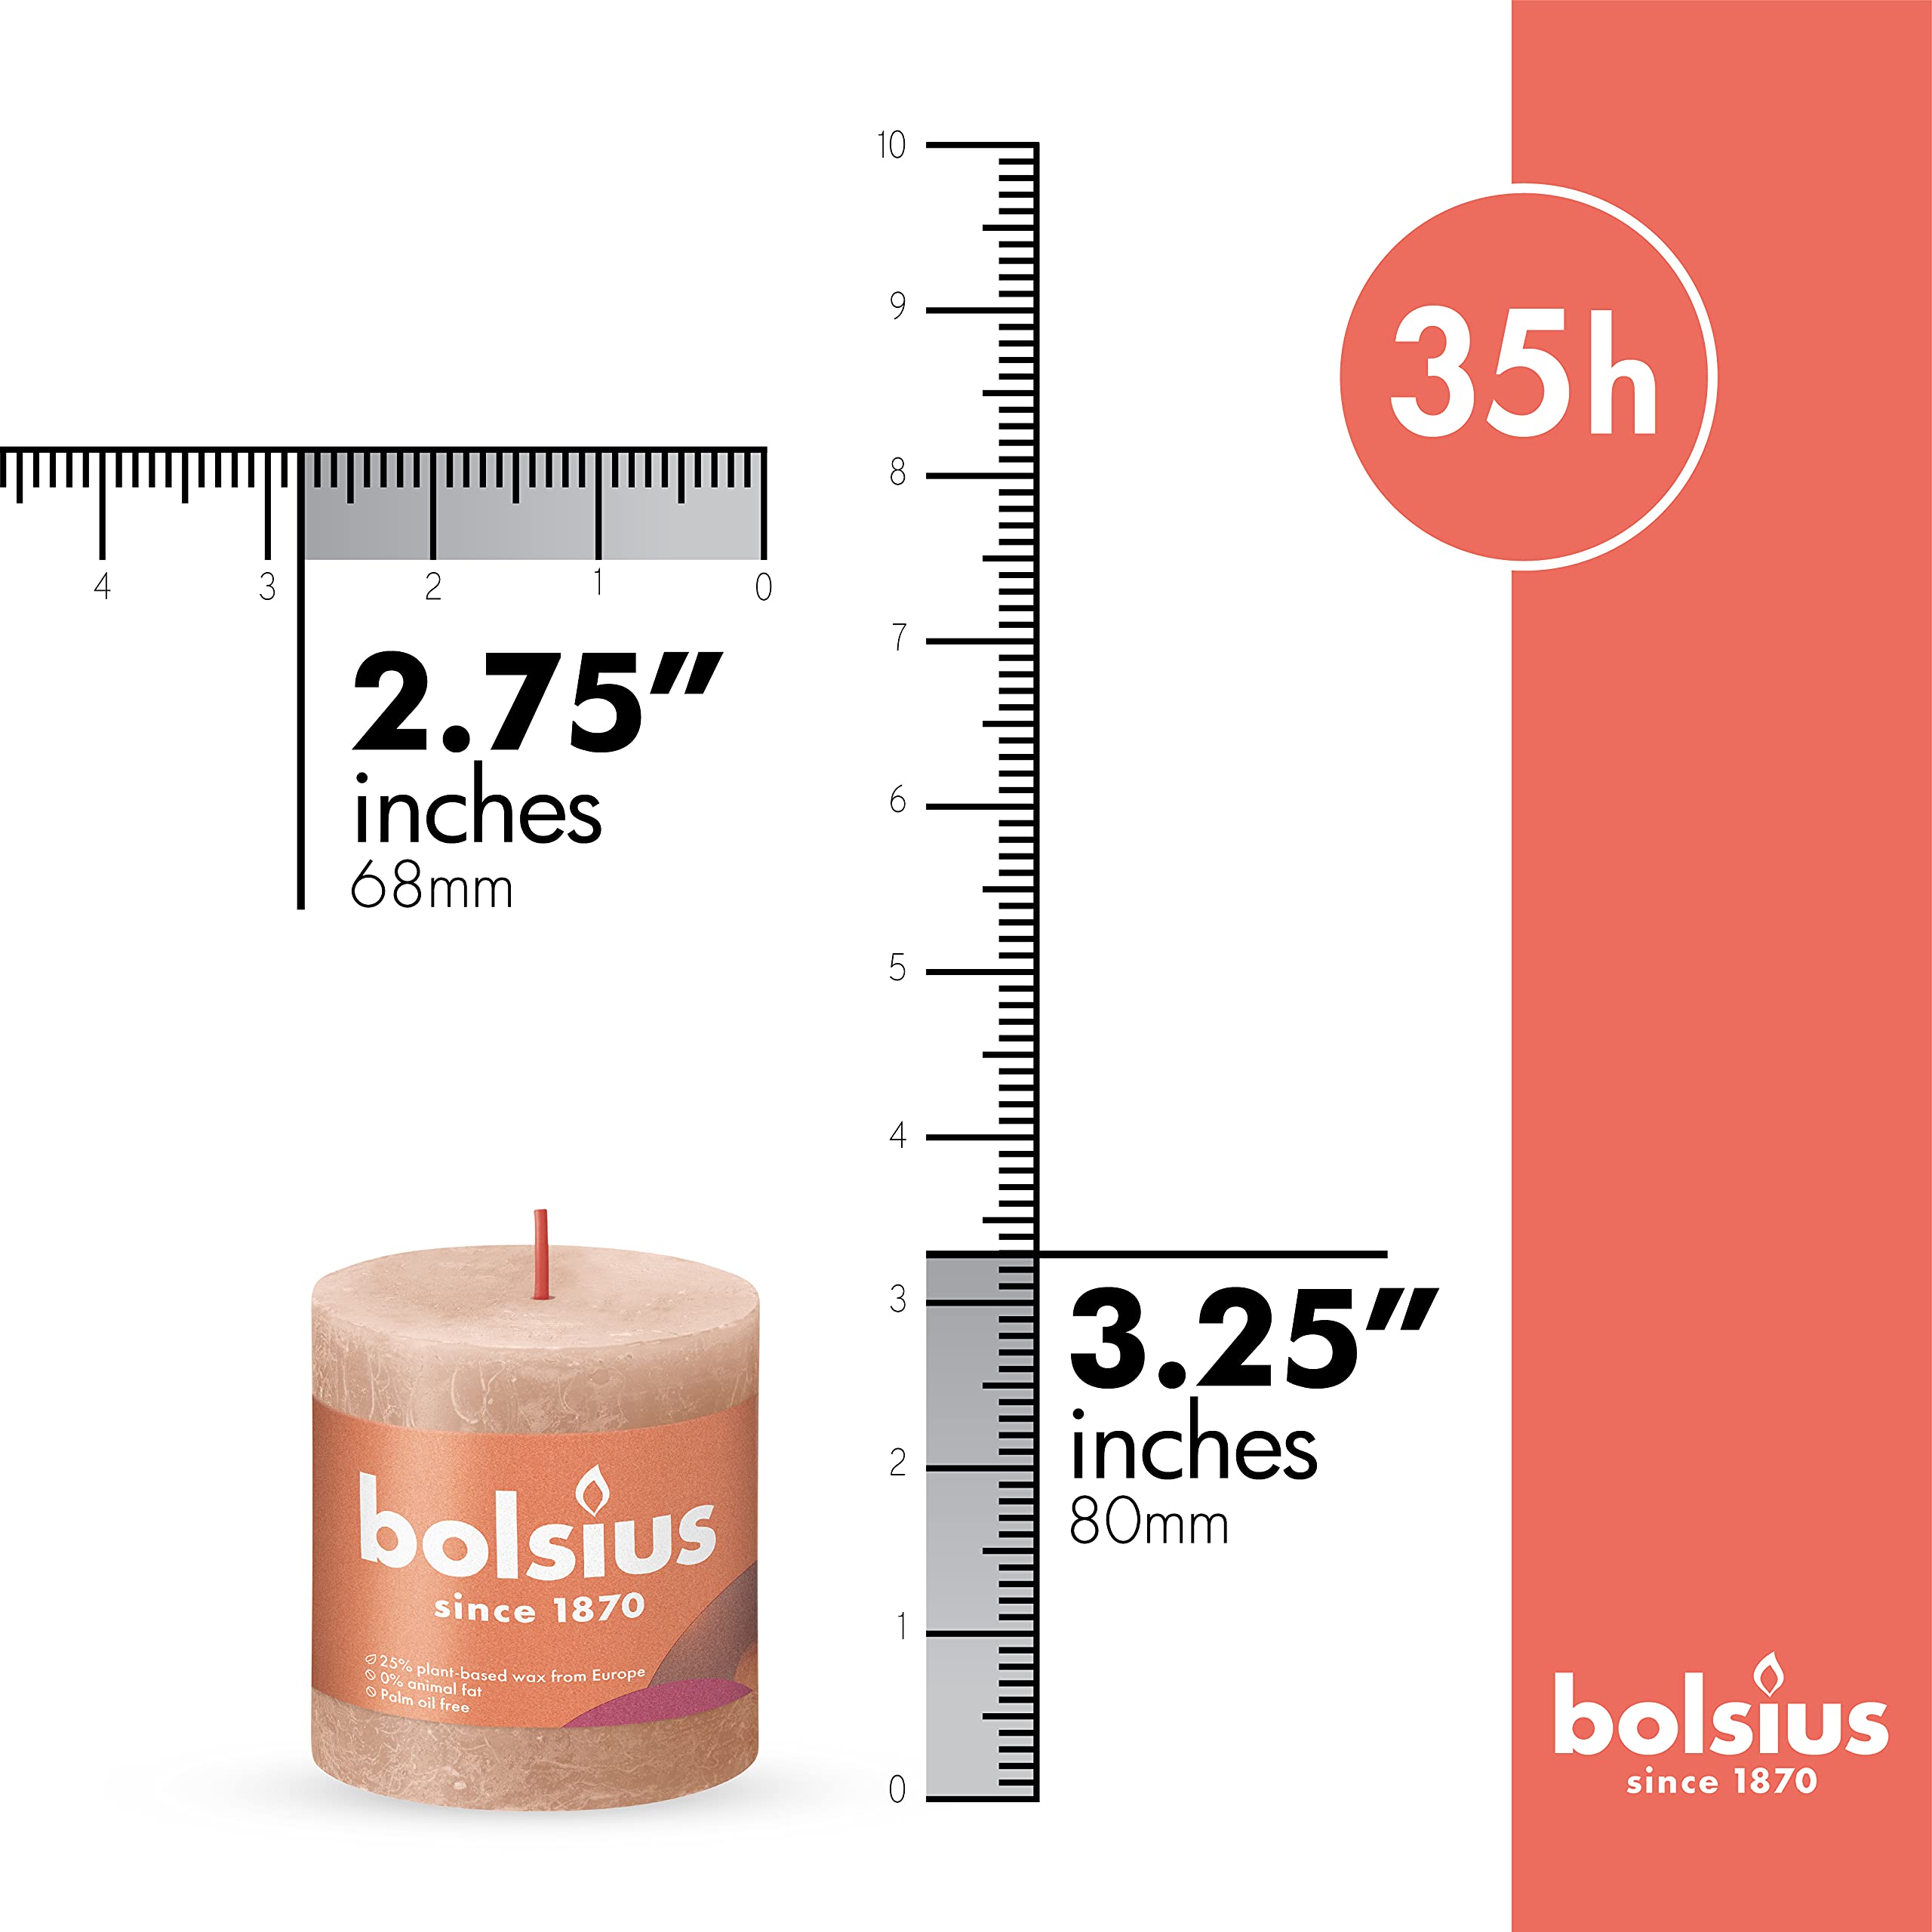 BOLSIUS 4 Pack Caramel Rustic Pillar Candles - 2.75 X 3.25 Inches - Premium European Quality - Includes Natural Plant-Based Wax - Unscented Dripless Smokeless 35 Hour Party and Wedding Candles  - Acceptable